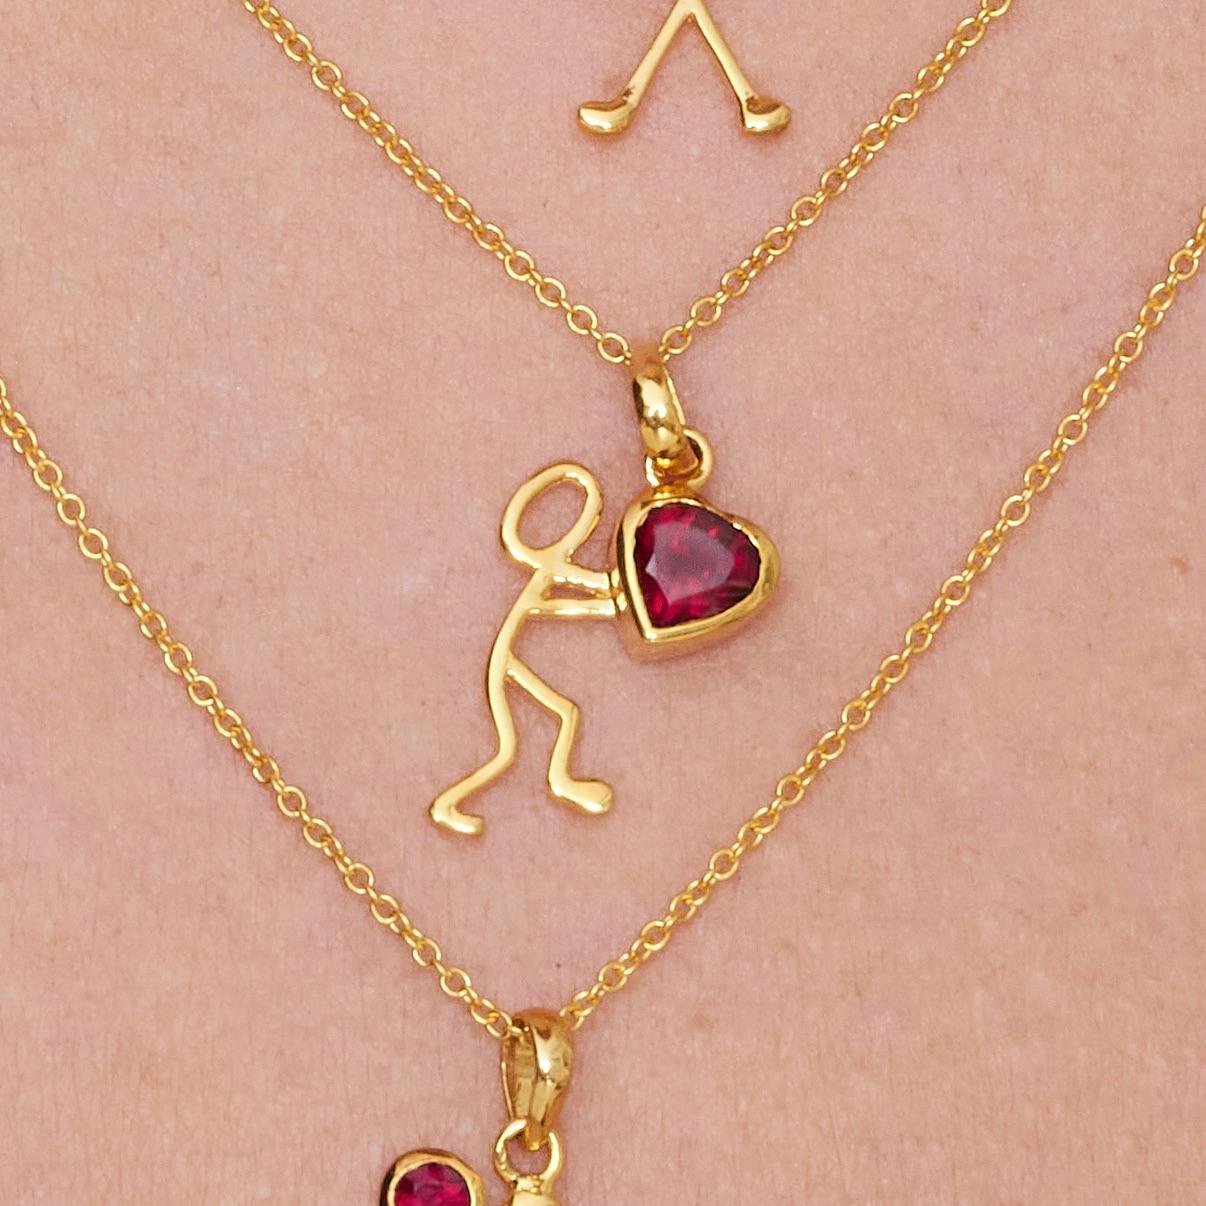 0.55 Carat Garnet Yellow Gold Stick Figure with Heart Pendant Necklace In New Condition For Sale In Woodstock, GA